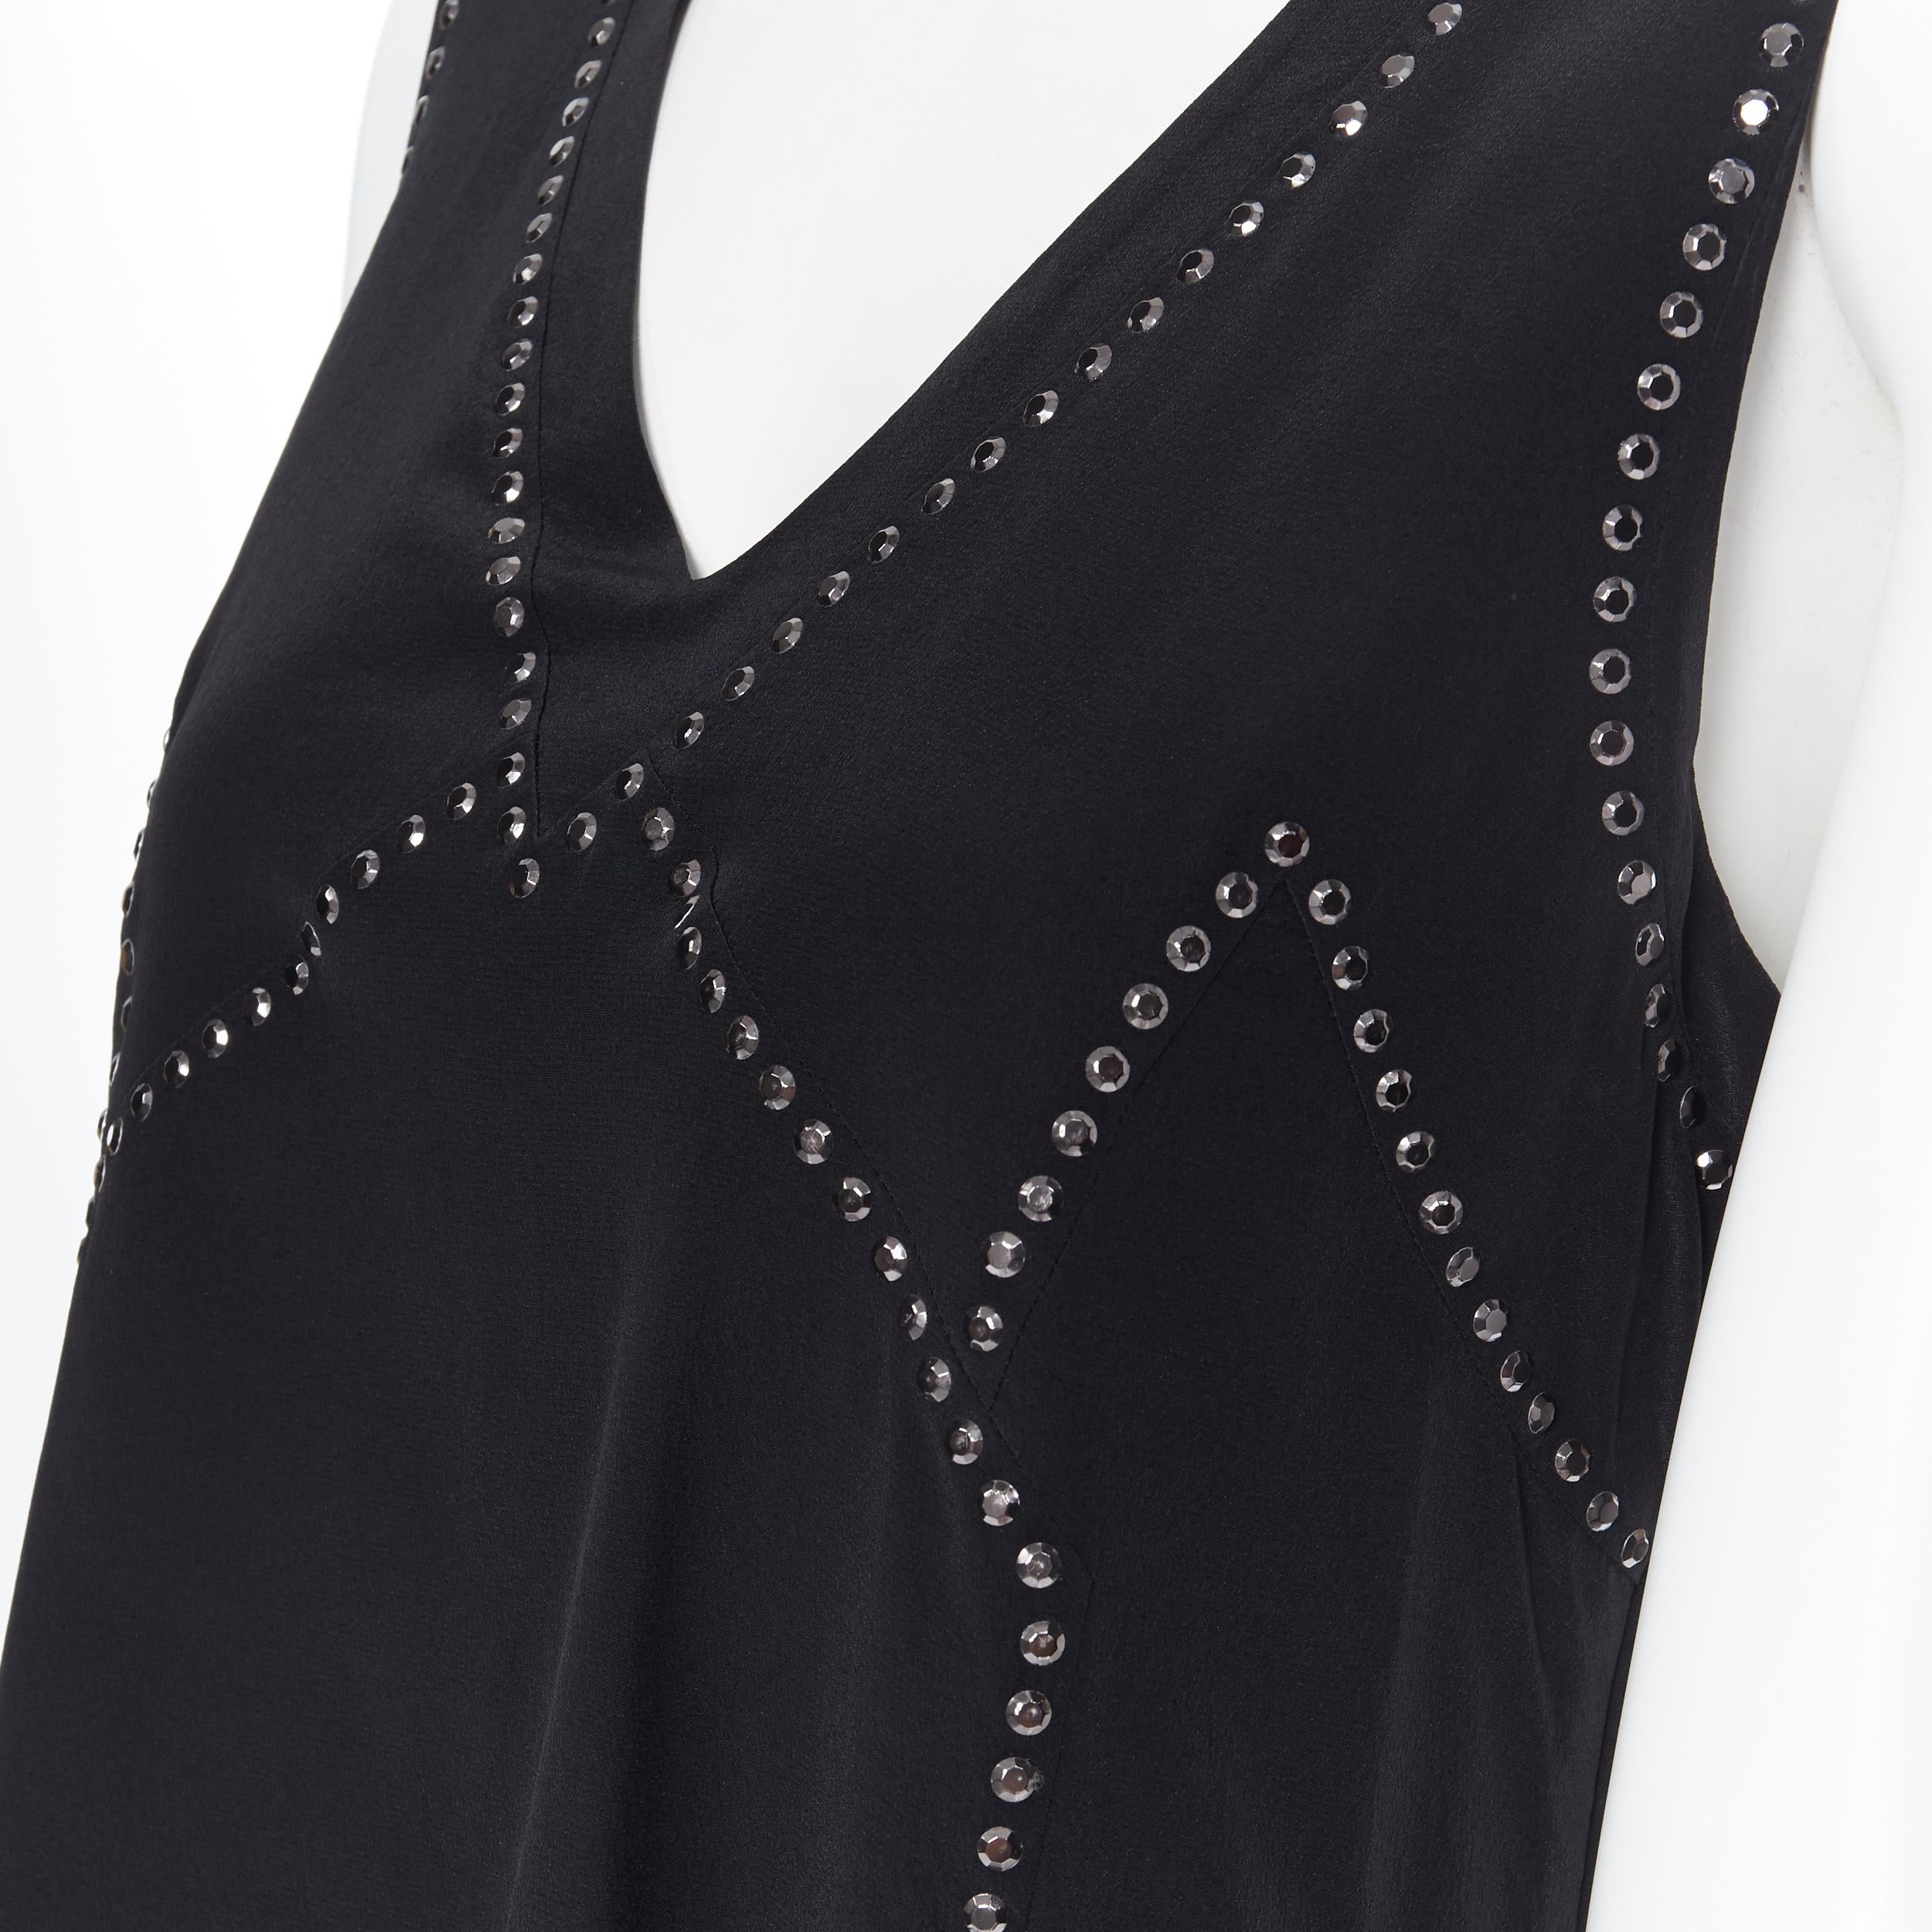 new MARC BY MARC JACOBS 100% black silk crystal embellished shell vest top S
Brand: Marc by Marc Jacobs
Model Name / Style: Silk top
Material: Silk
Color: White
Pattern: Solid
Closure: Button
Extra Detail: Tonal crystal embellishment.
Made in: